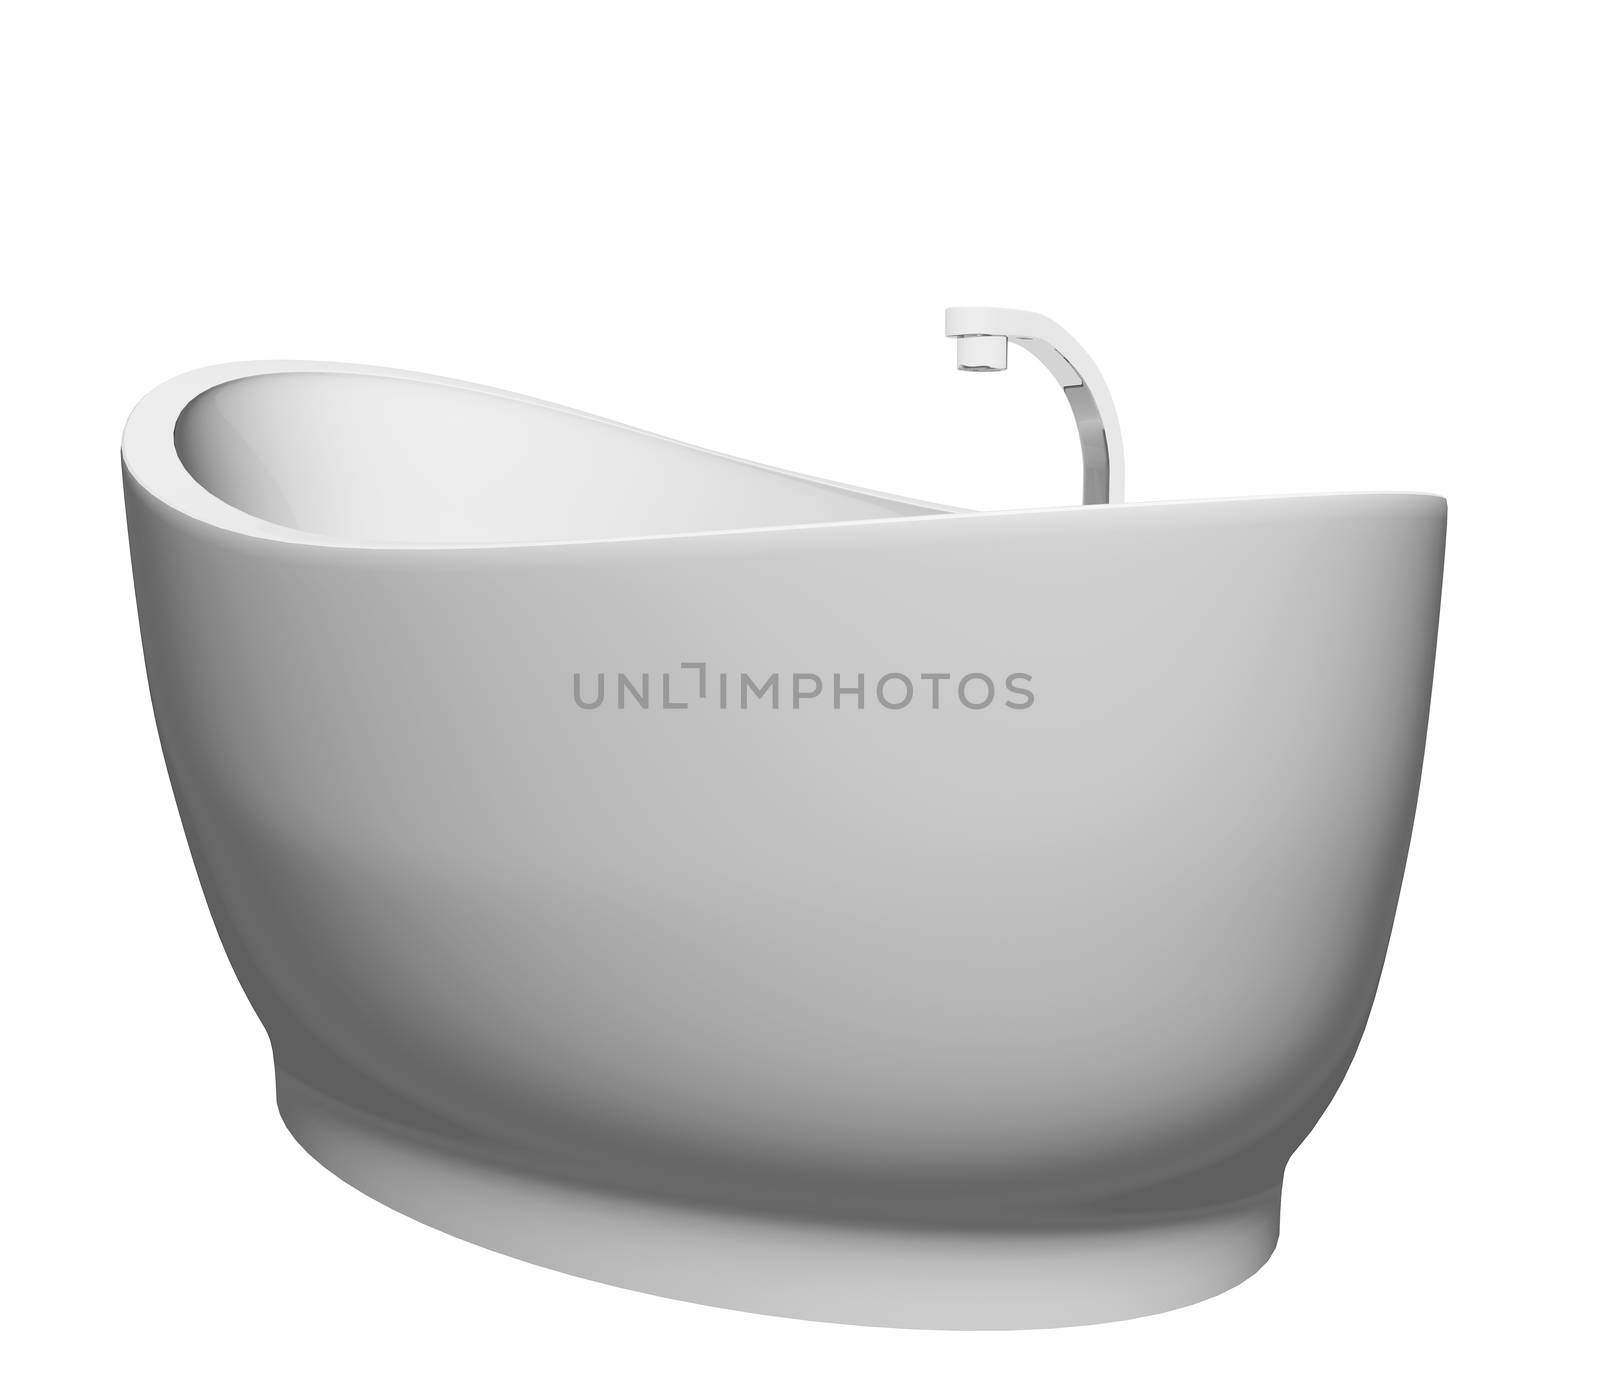 Pedestal modern white bathtub with stainless steel fixtures, isolated against a white background by Morphart